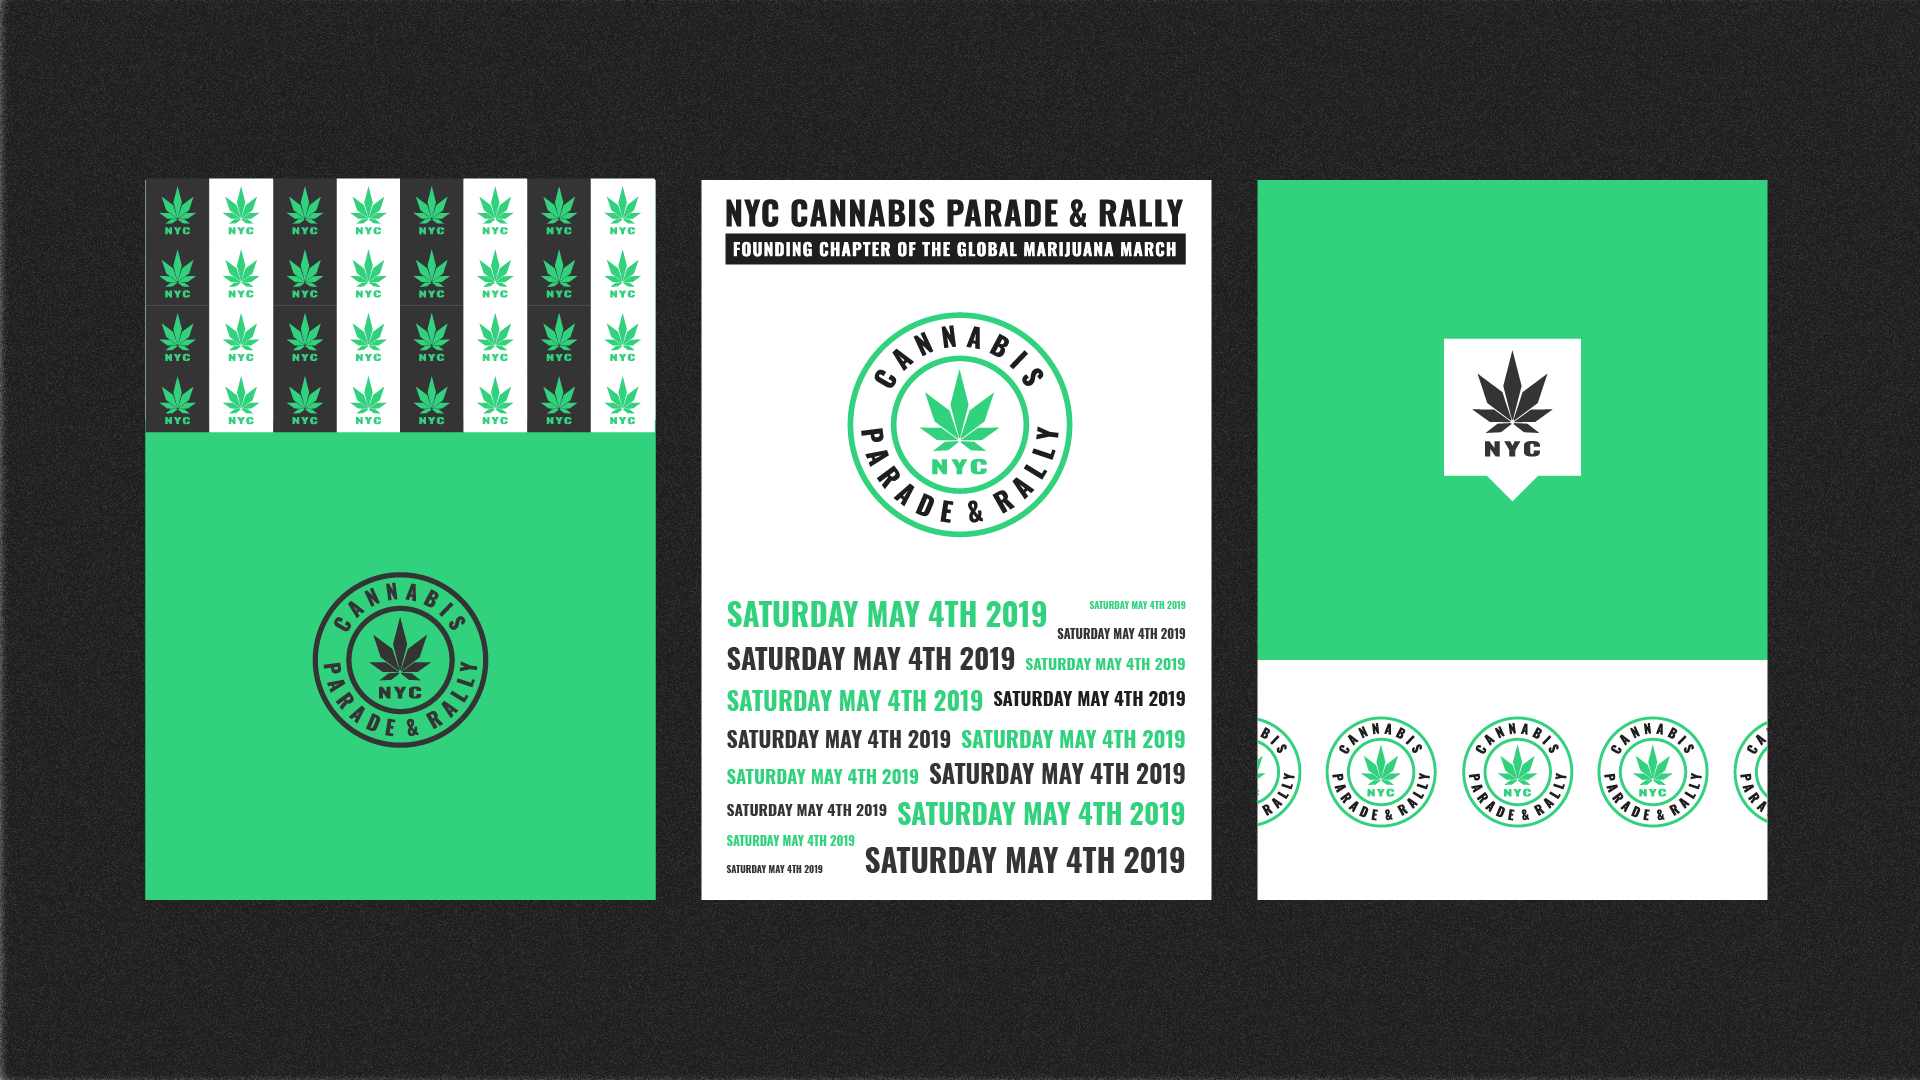 NYC Cannabis Parade visual identity by Mark Forscher